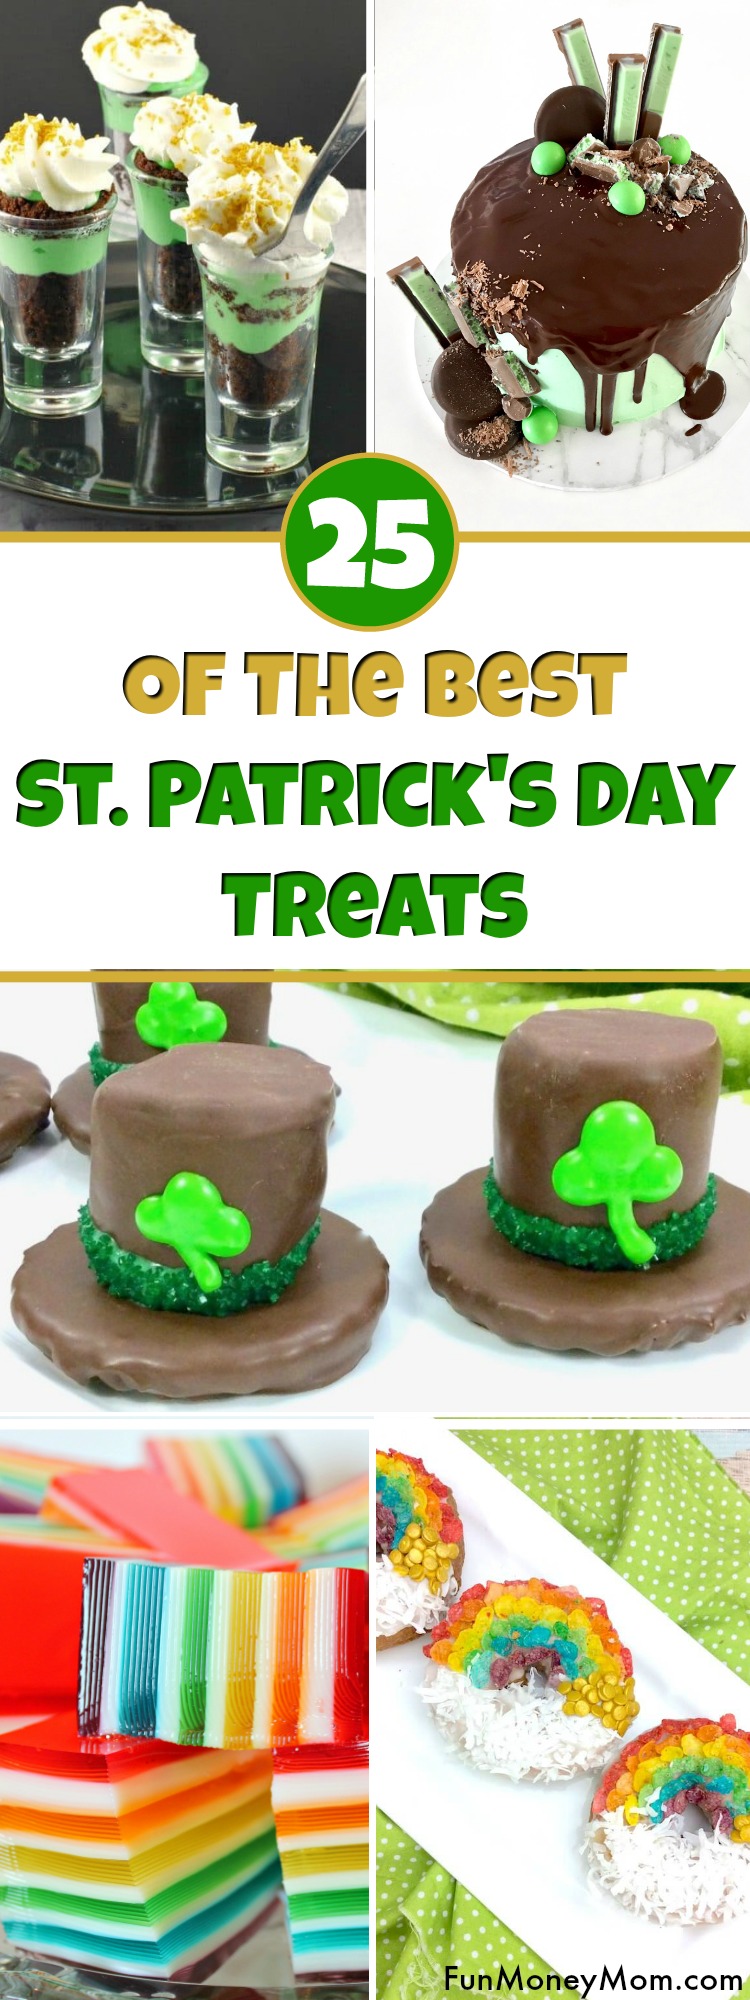 25 of the best st. patrick’s day treat ideas